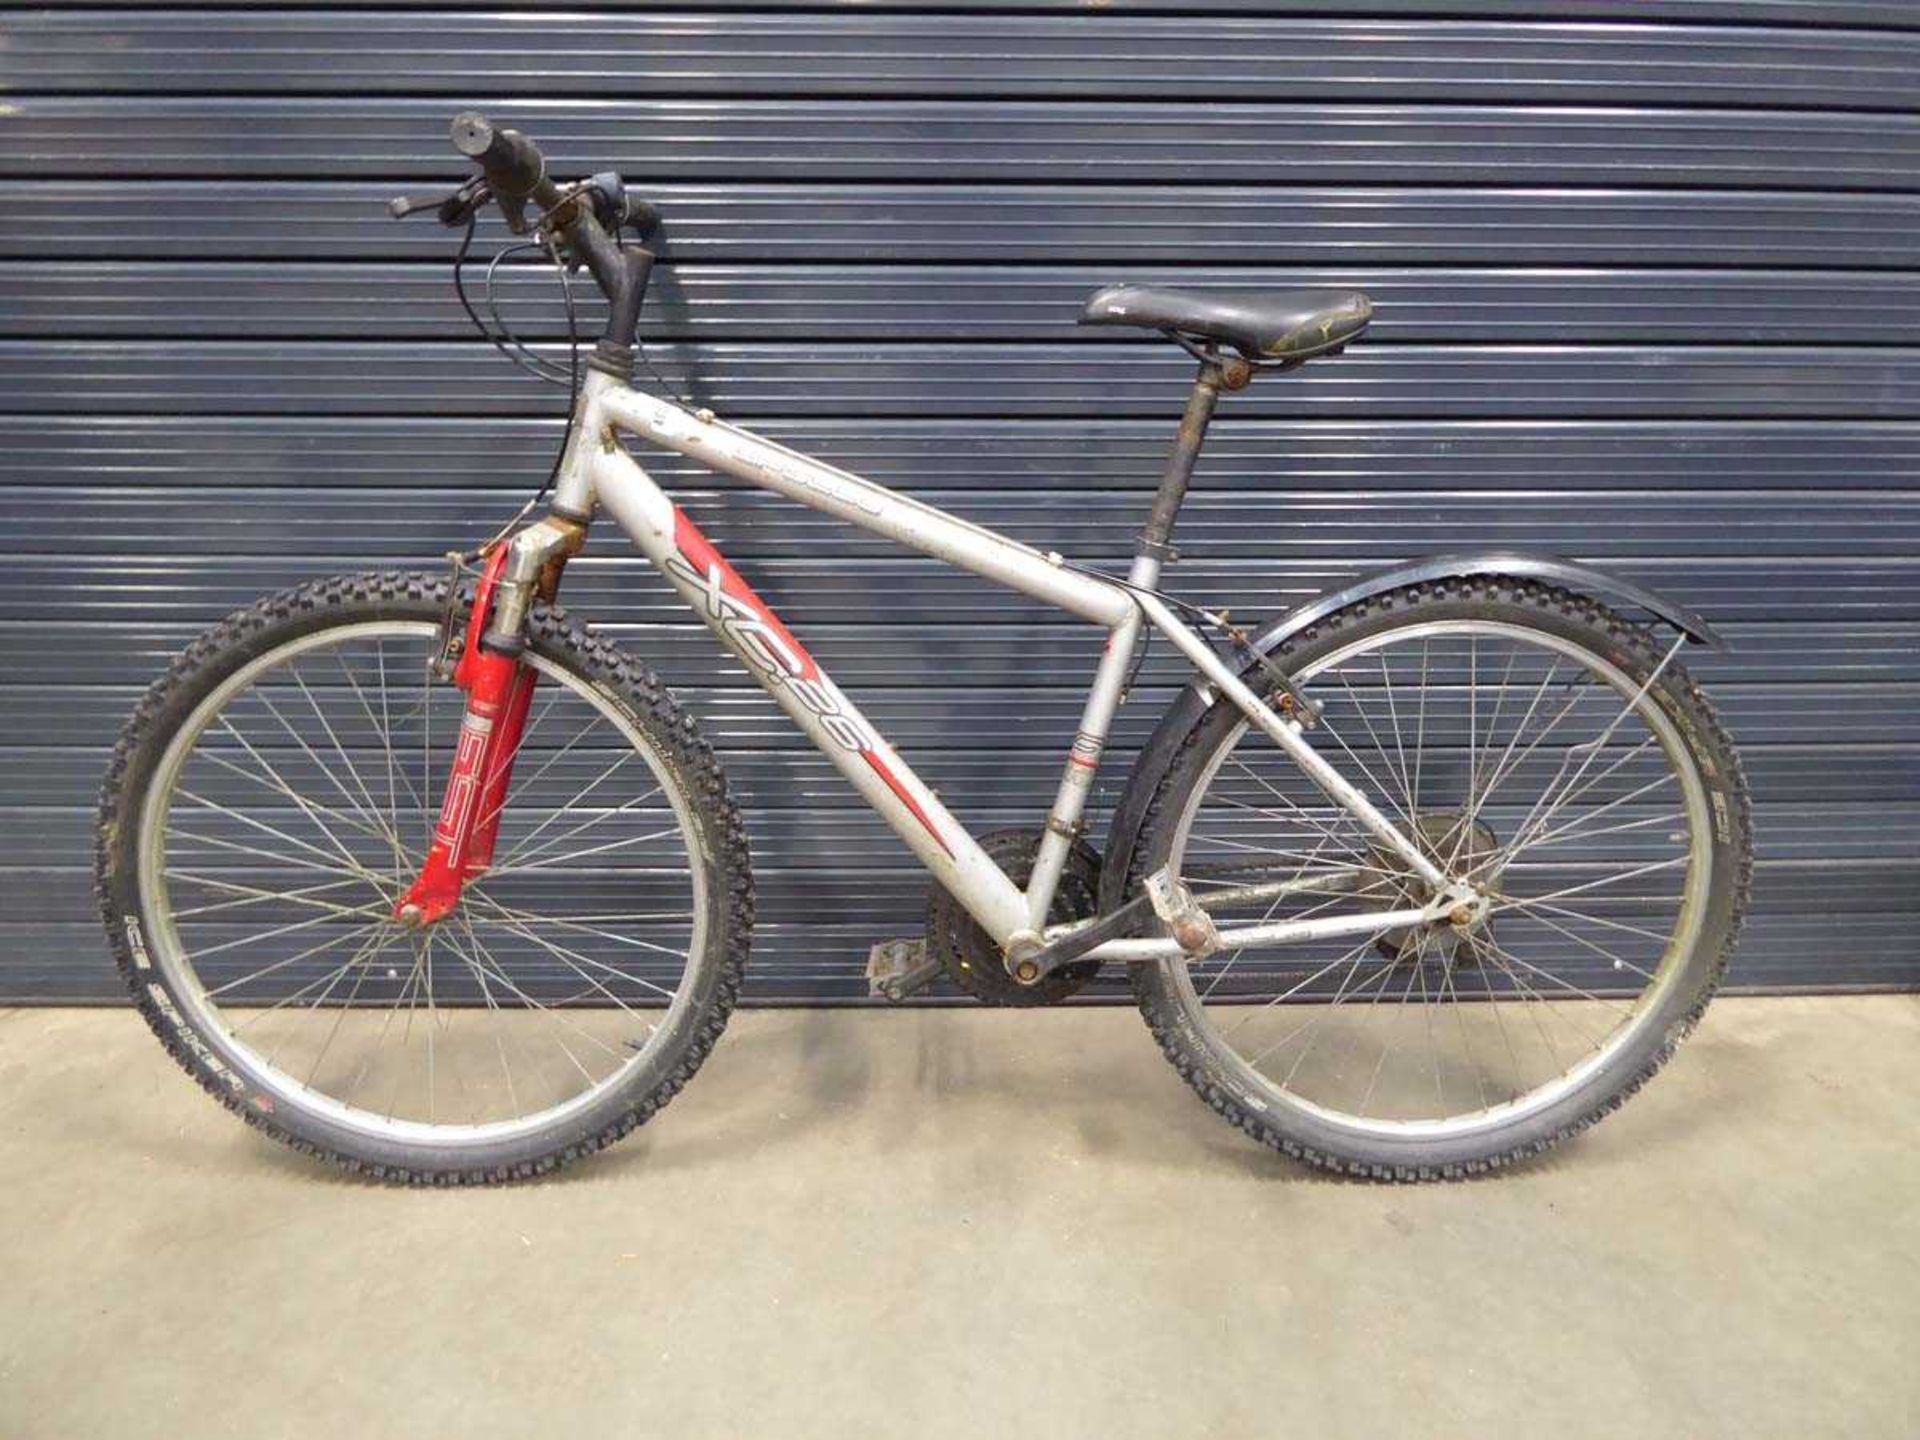 Silver and red mountain bike